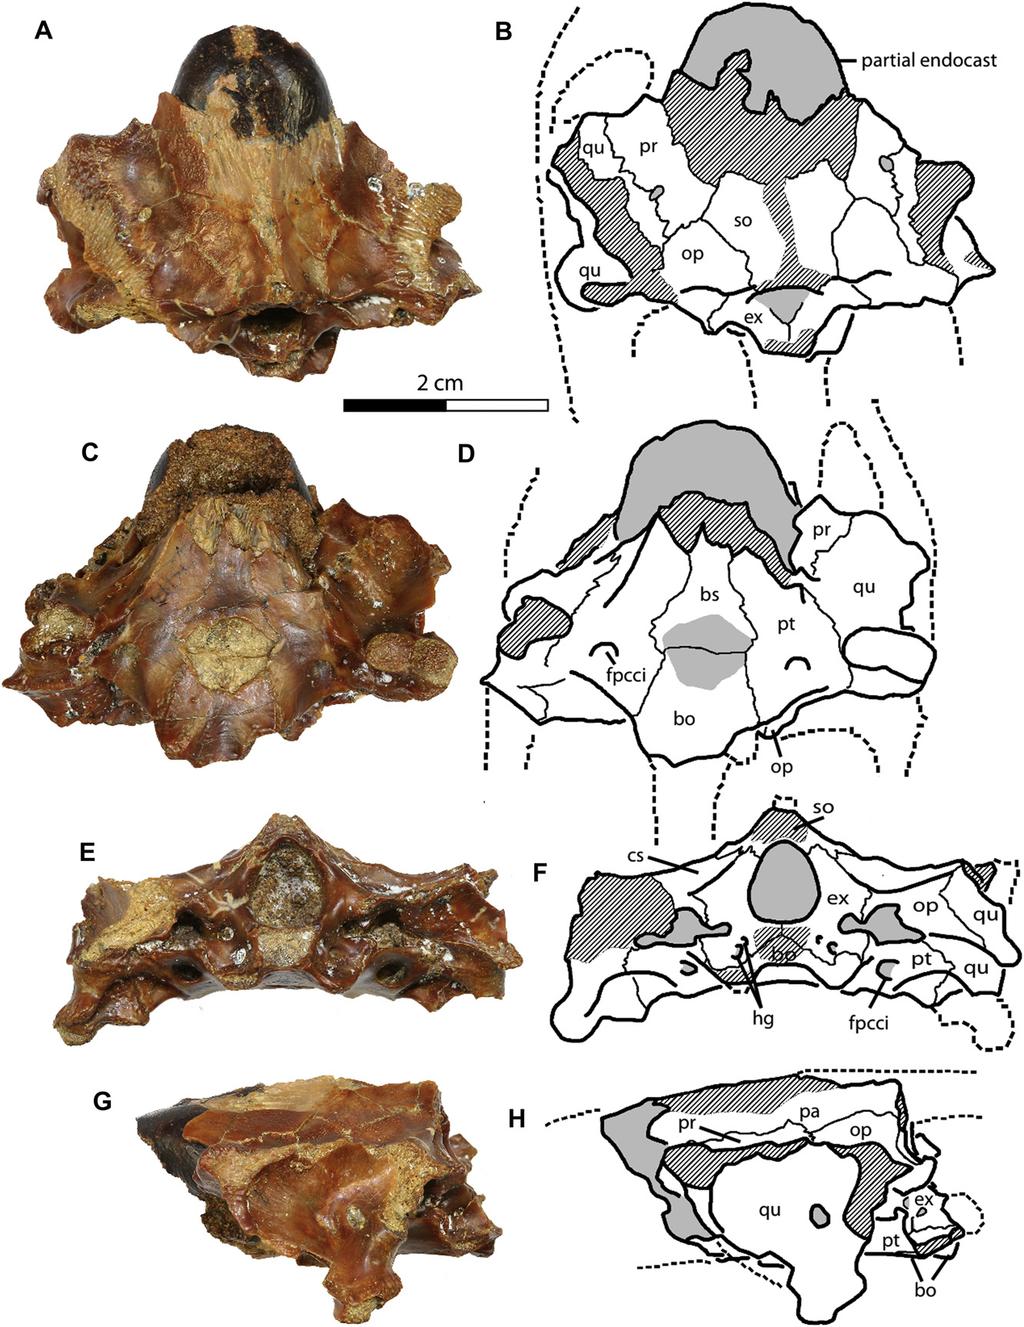 52 N.S. Vitek, I.G. Danilov / Cretaceous Research 43 (2013) 48e58 Fig. 2. ZIN PH 33/17, braincase of Trionychini indet. from the Dzharakuduk locality of the Turonian Bissekty Formation of Uzbekistan.